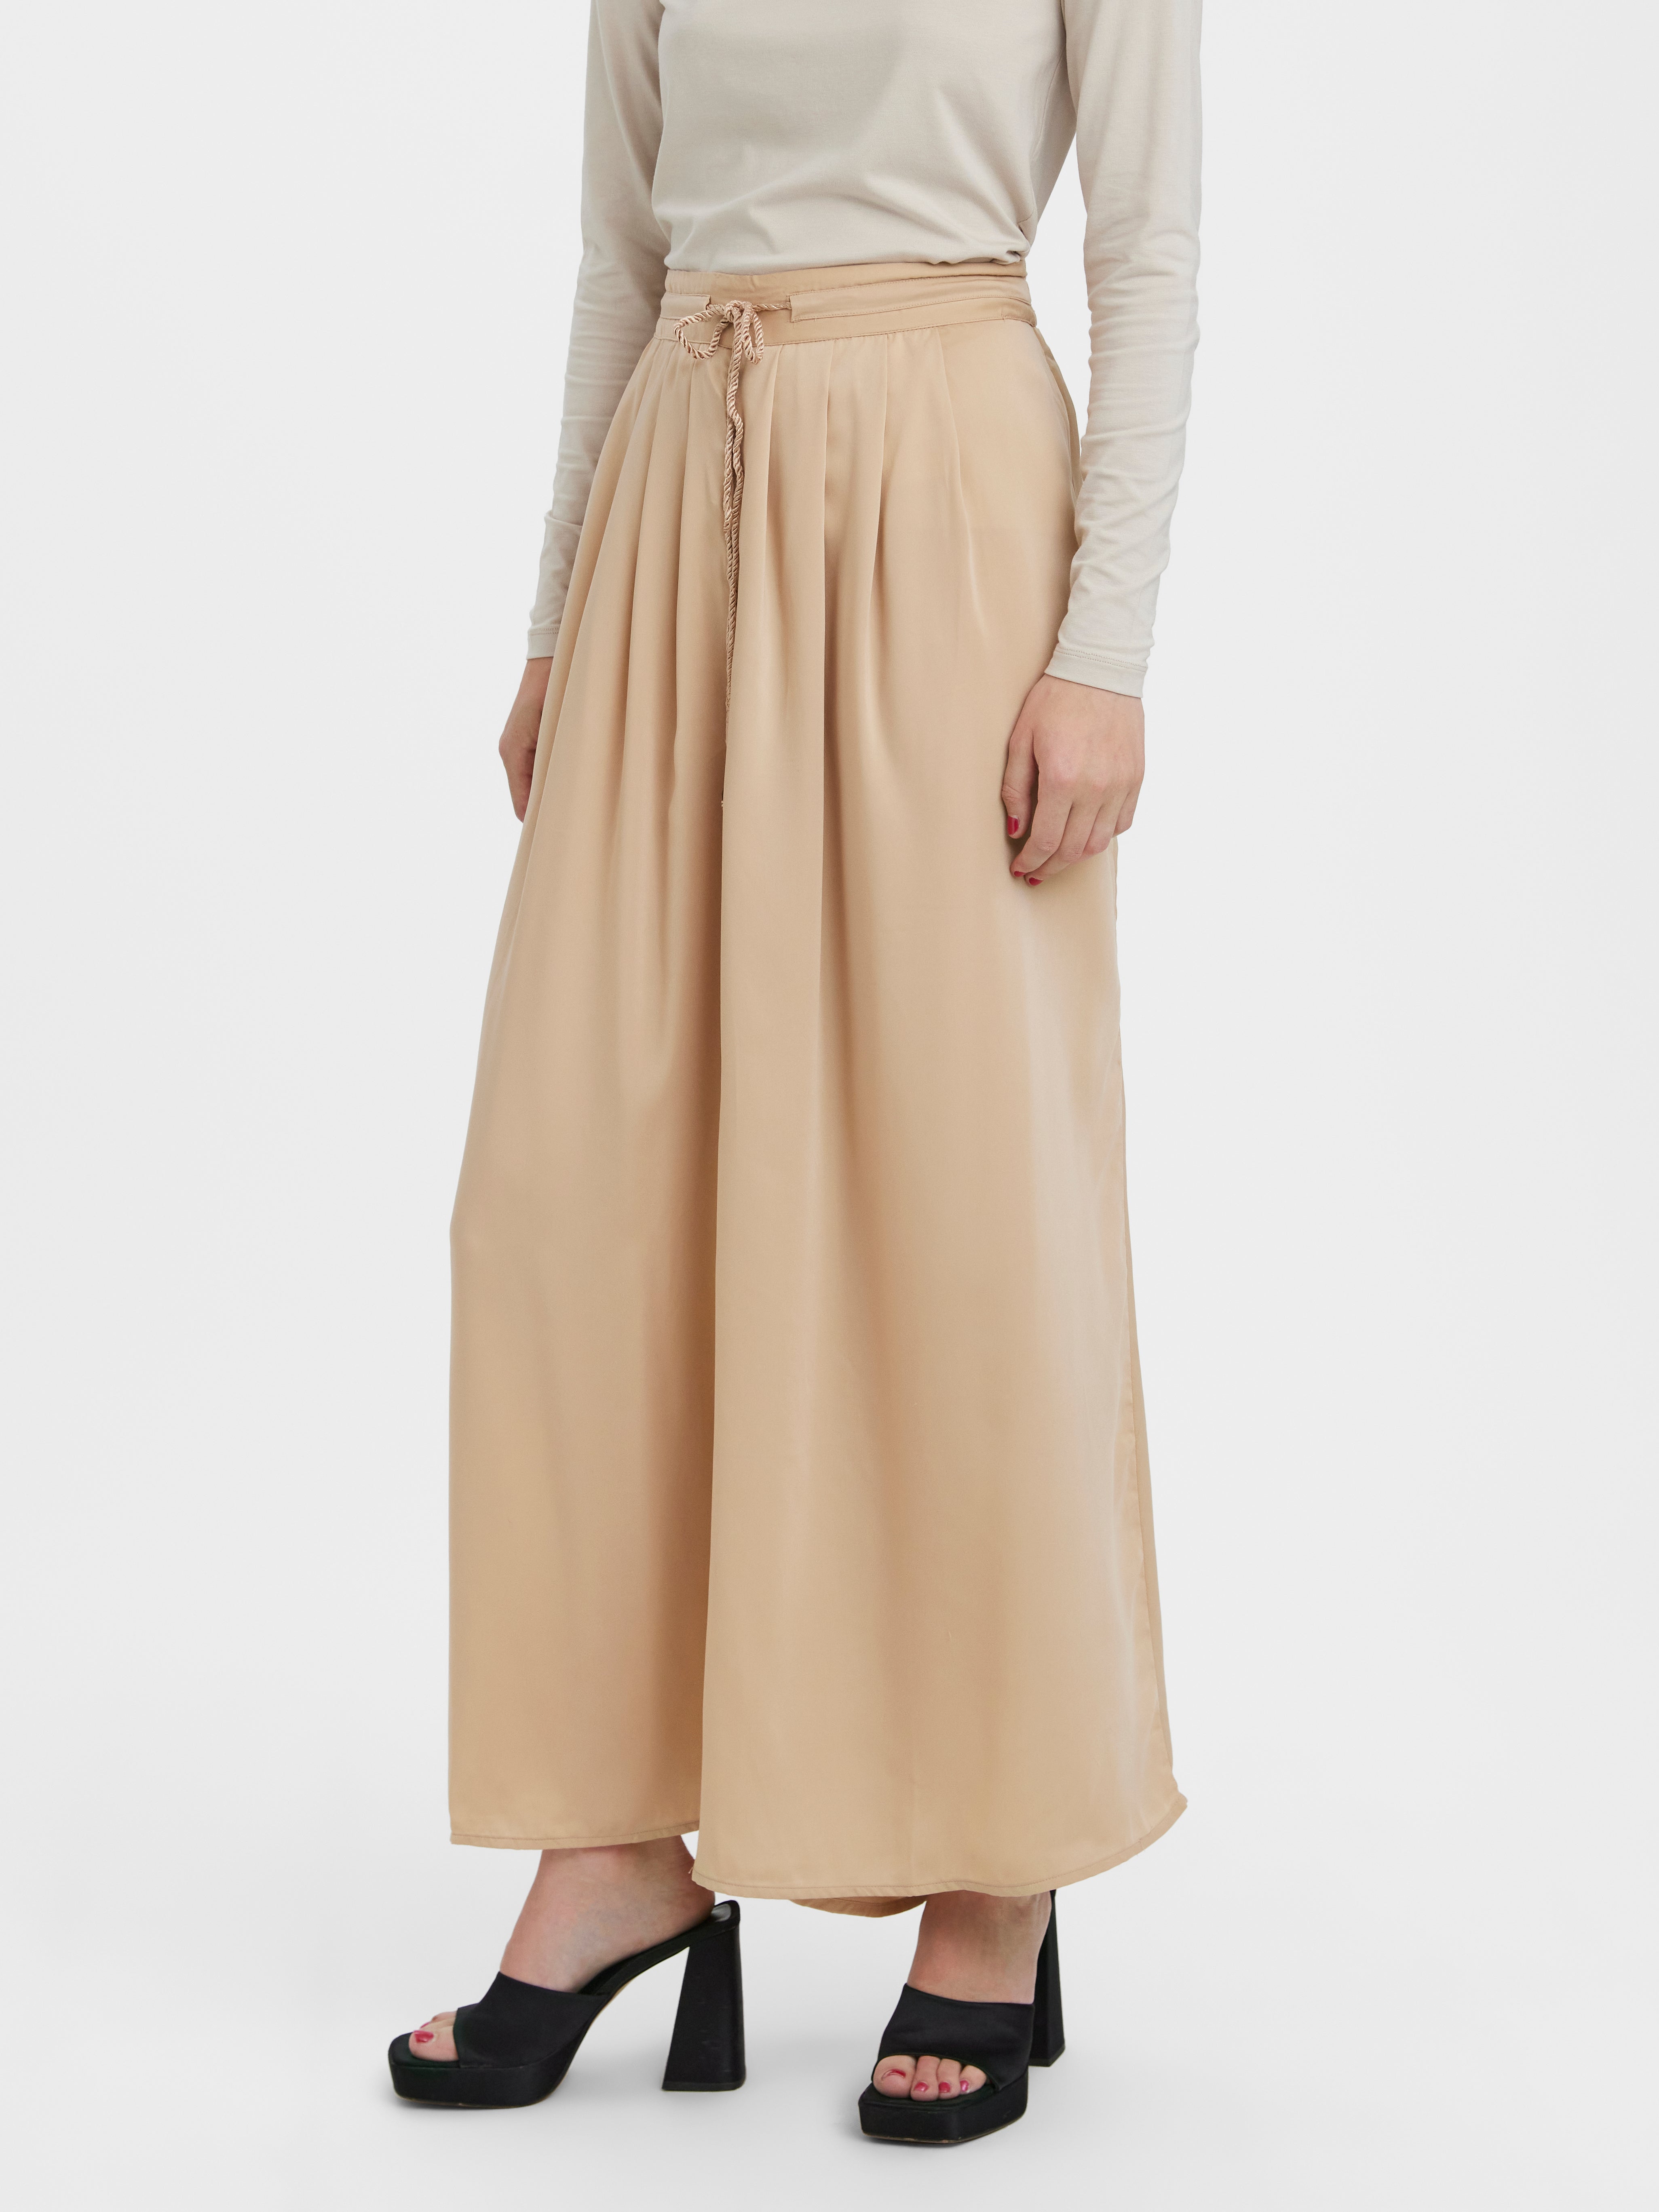 Loose Fit Trousers  VERO MODA UK  StyleSearch